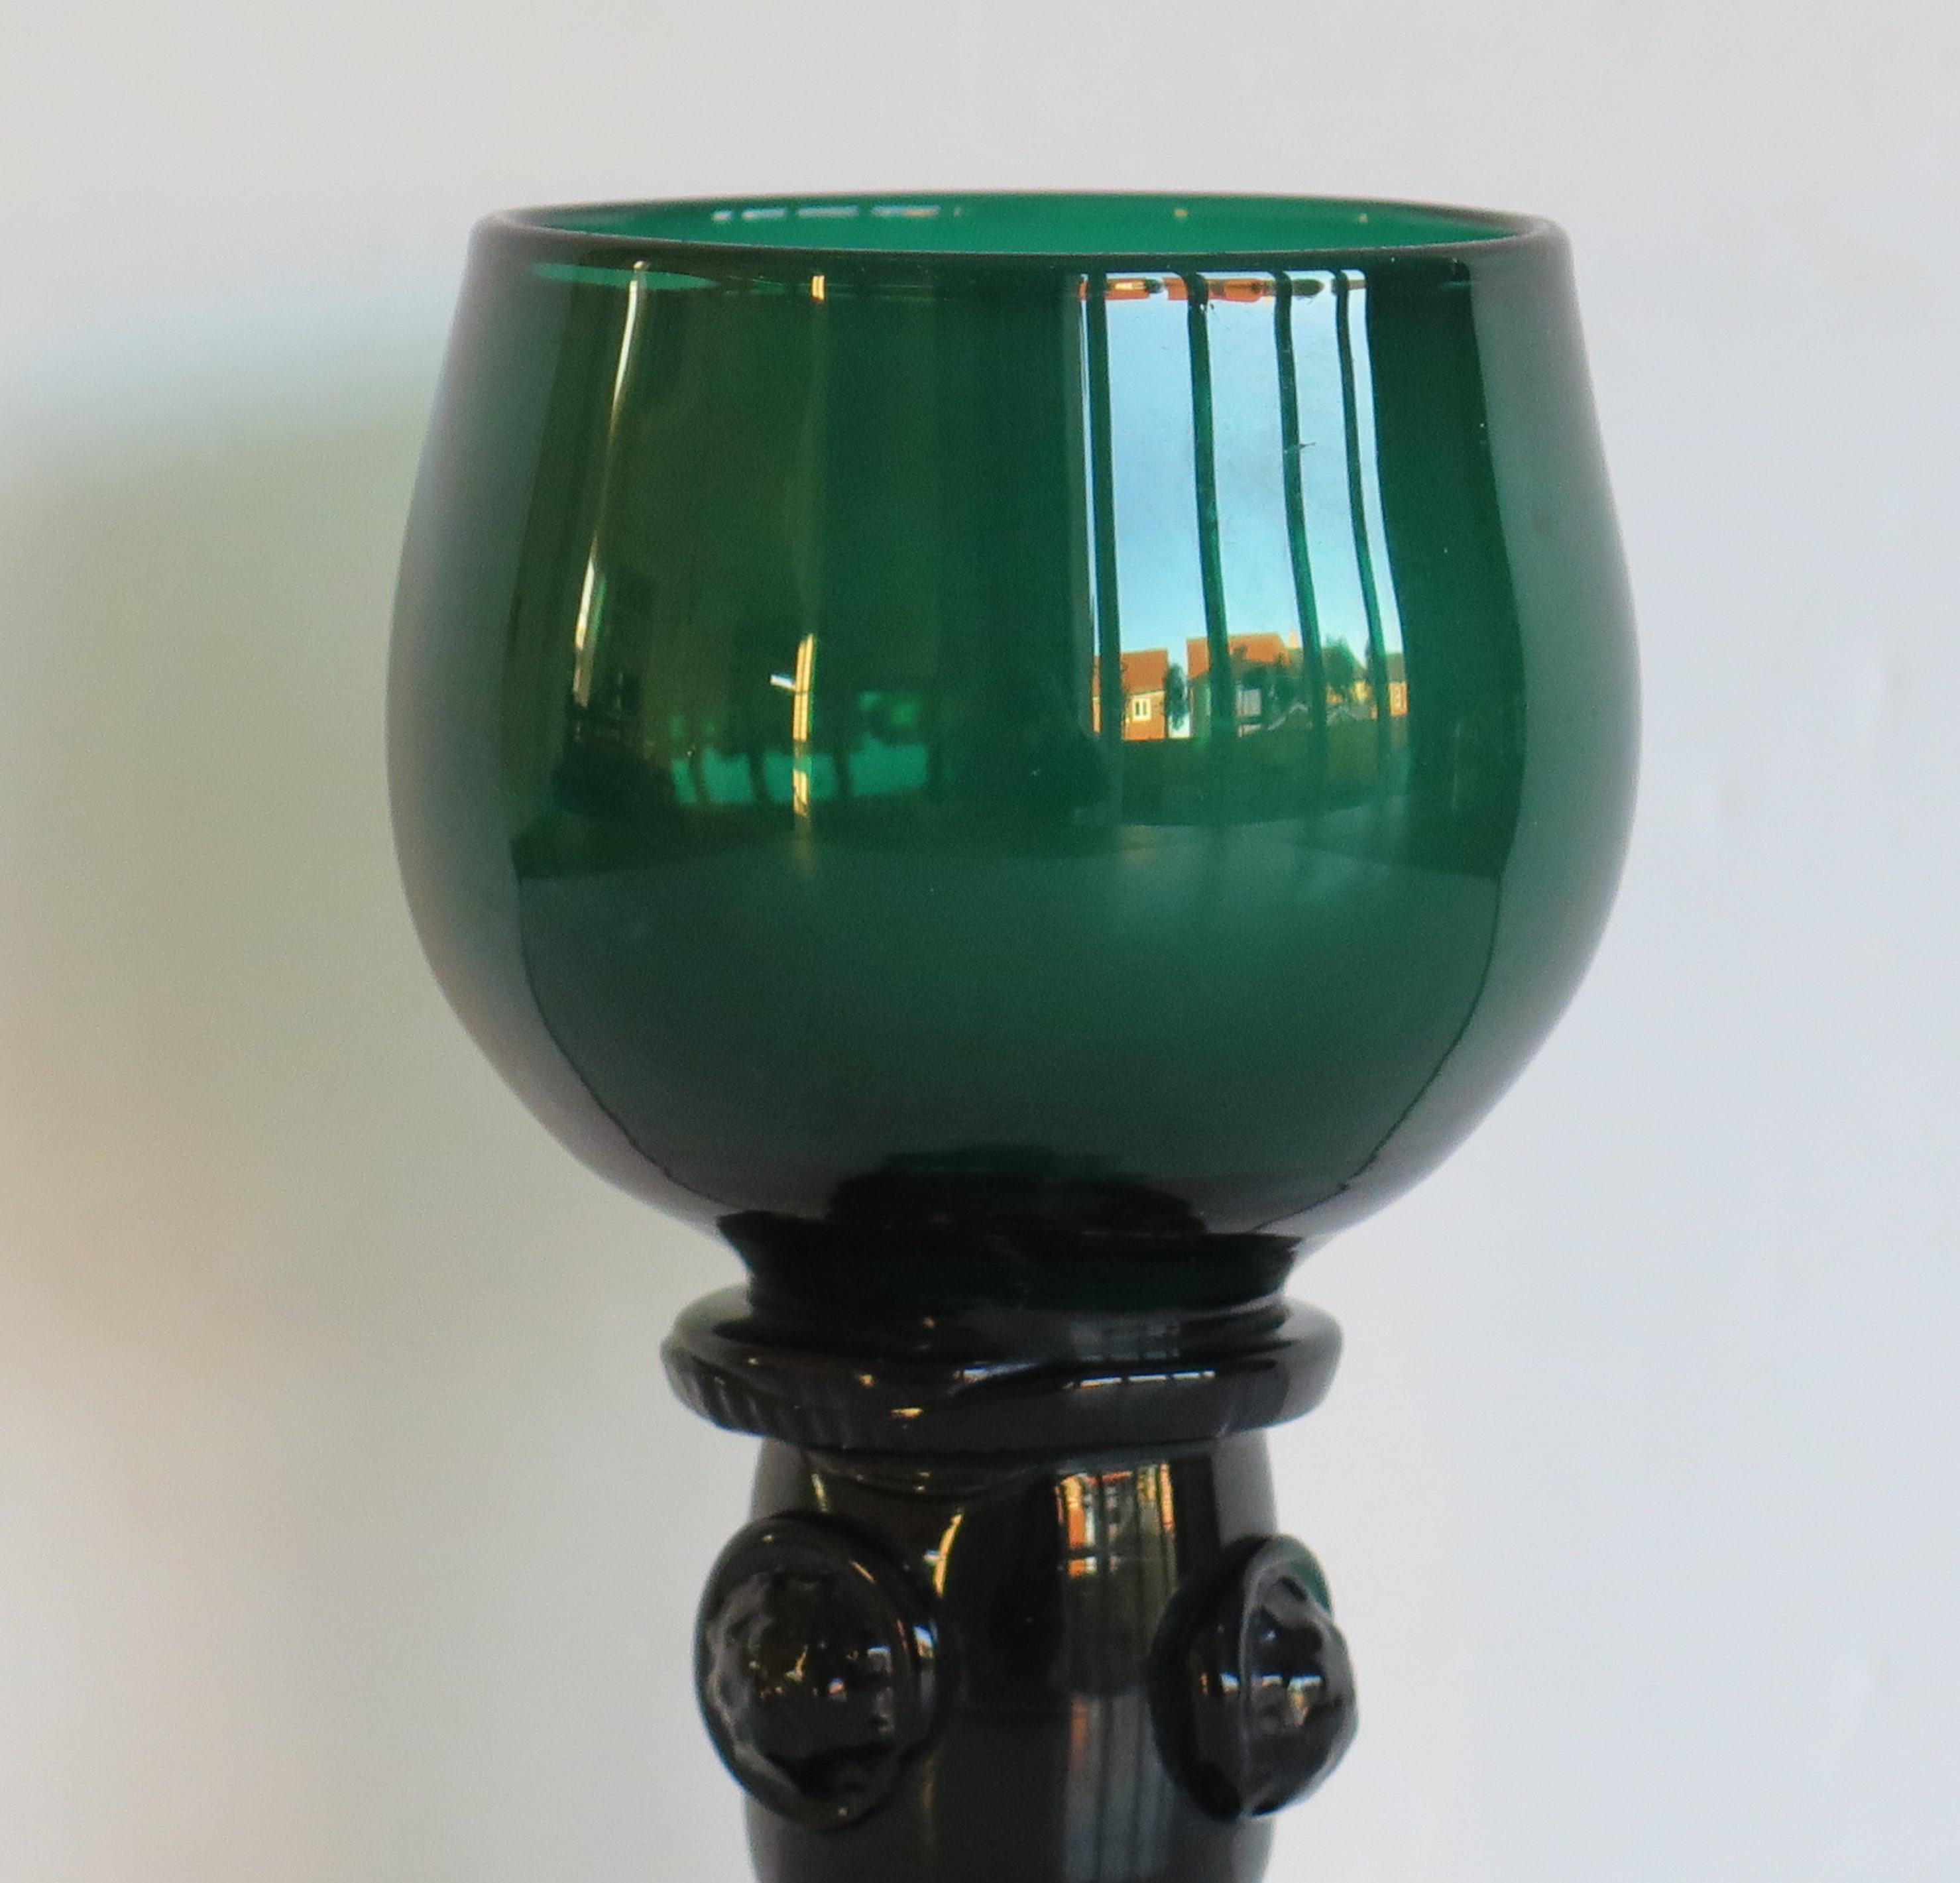 This is an excellent example of an early 19th century, English, hand blown, Bristol green wine drinking glass or ROAMER which we date to the George 111rd Regency period, circa 1815.

These glass ROAMERS are fairly rare. The glass has a cup bowl with